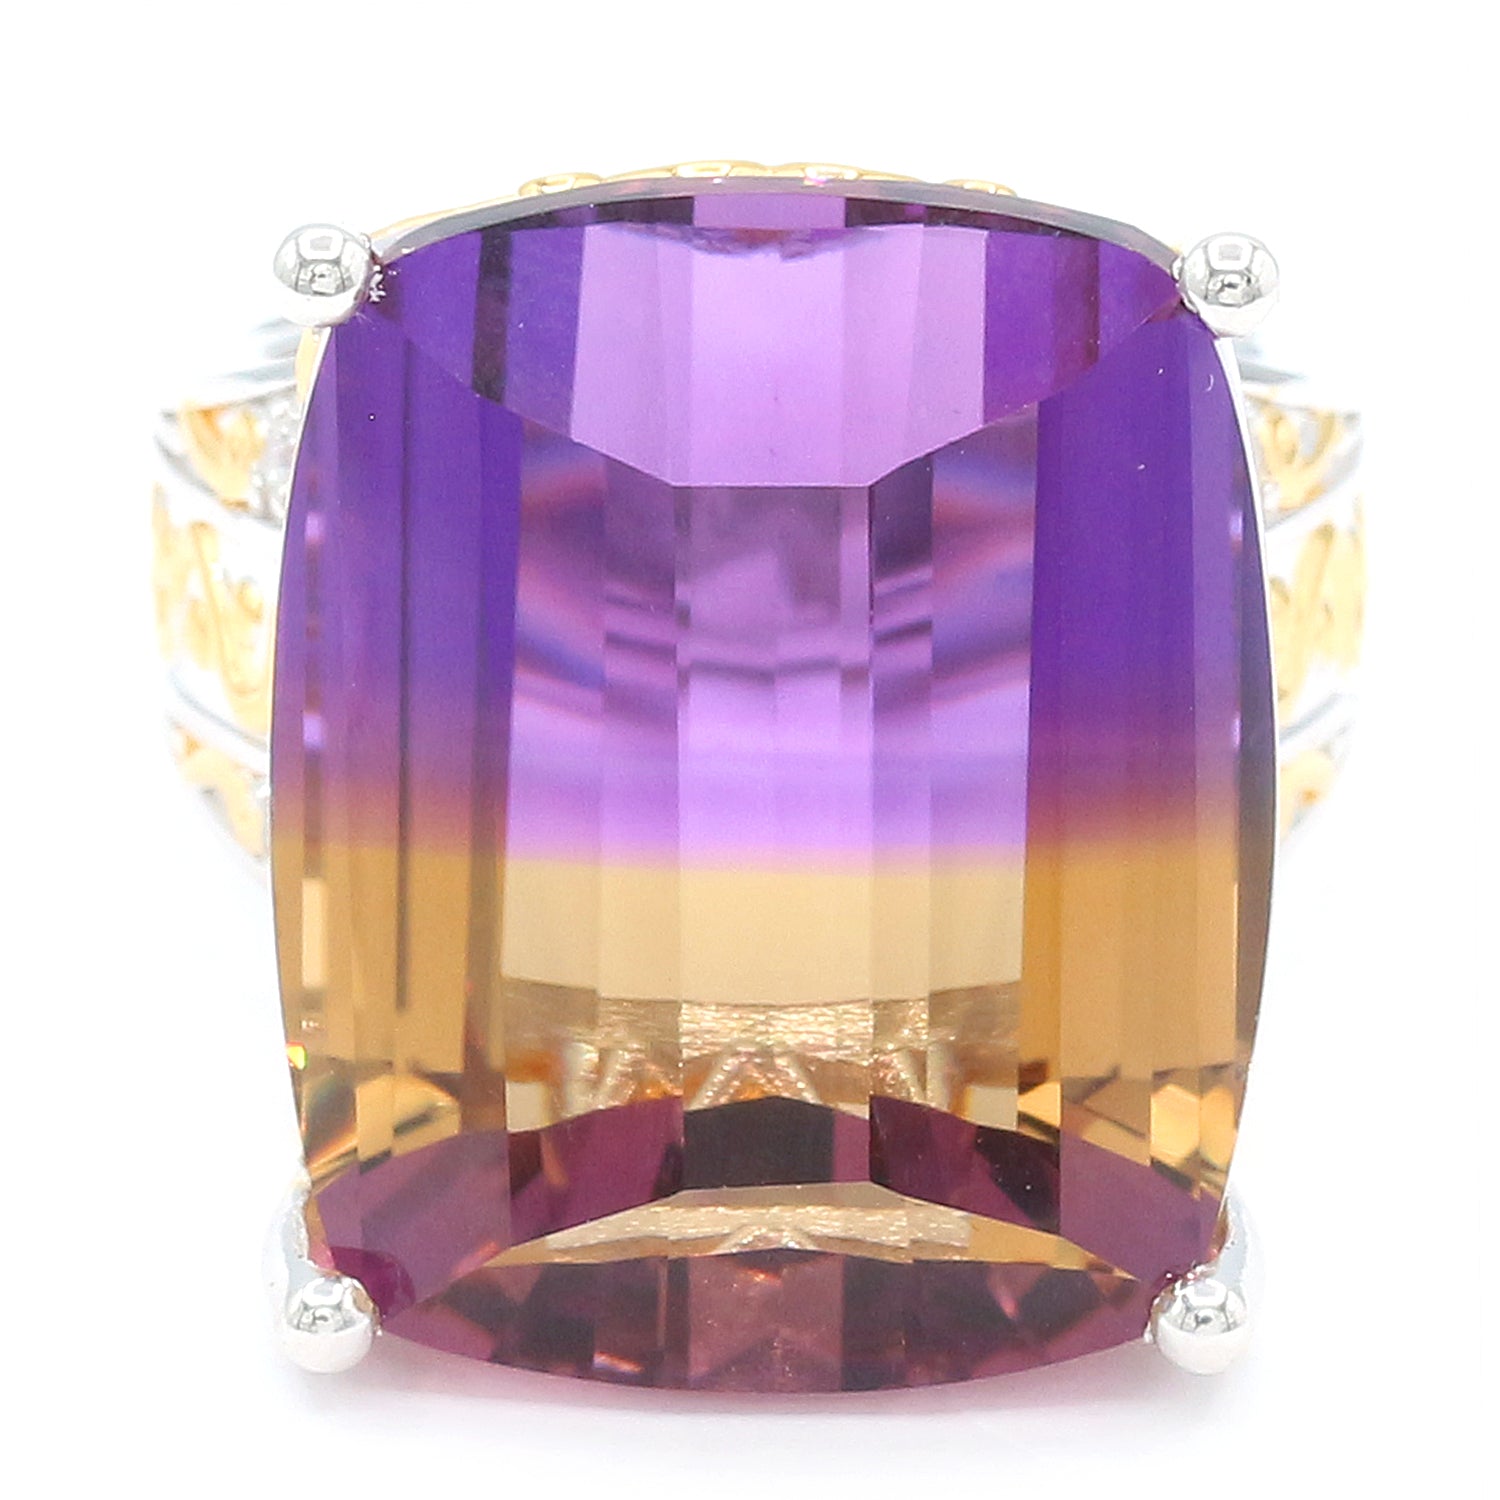 Limited Edition Gems en Vogue Luxe, One-of-a-Kind 36.88ctw Ametrine & White Zircon Honker Ring